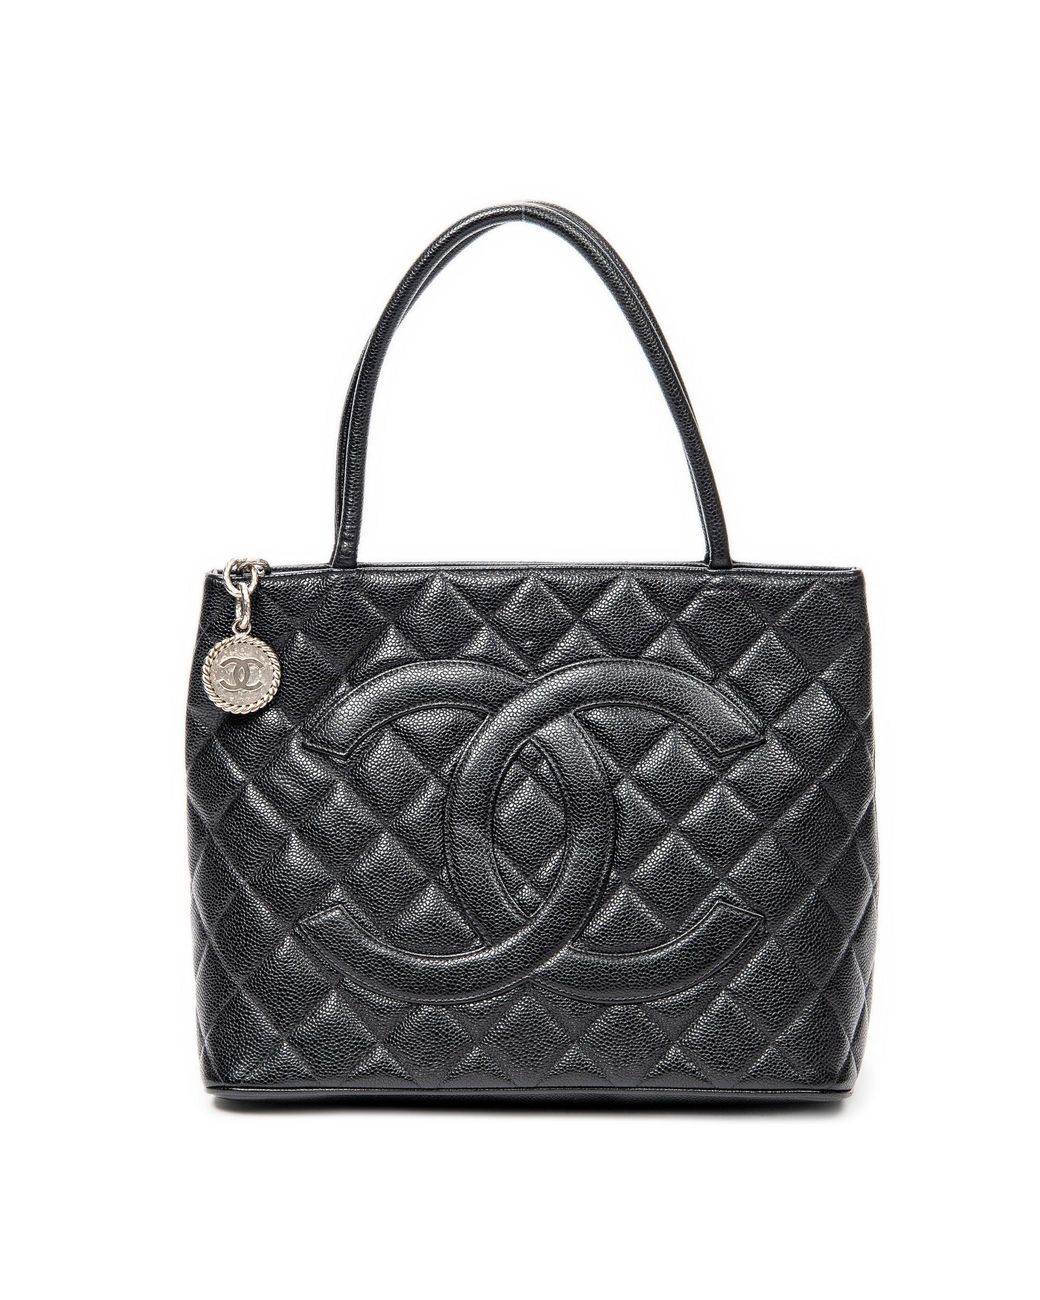 Chanel Cc Timeless Medallion Tote in Black